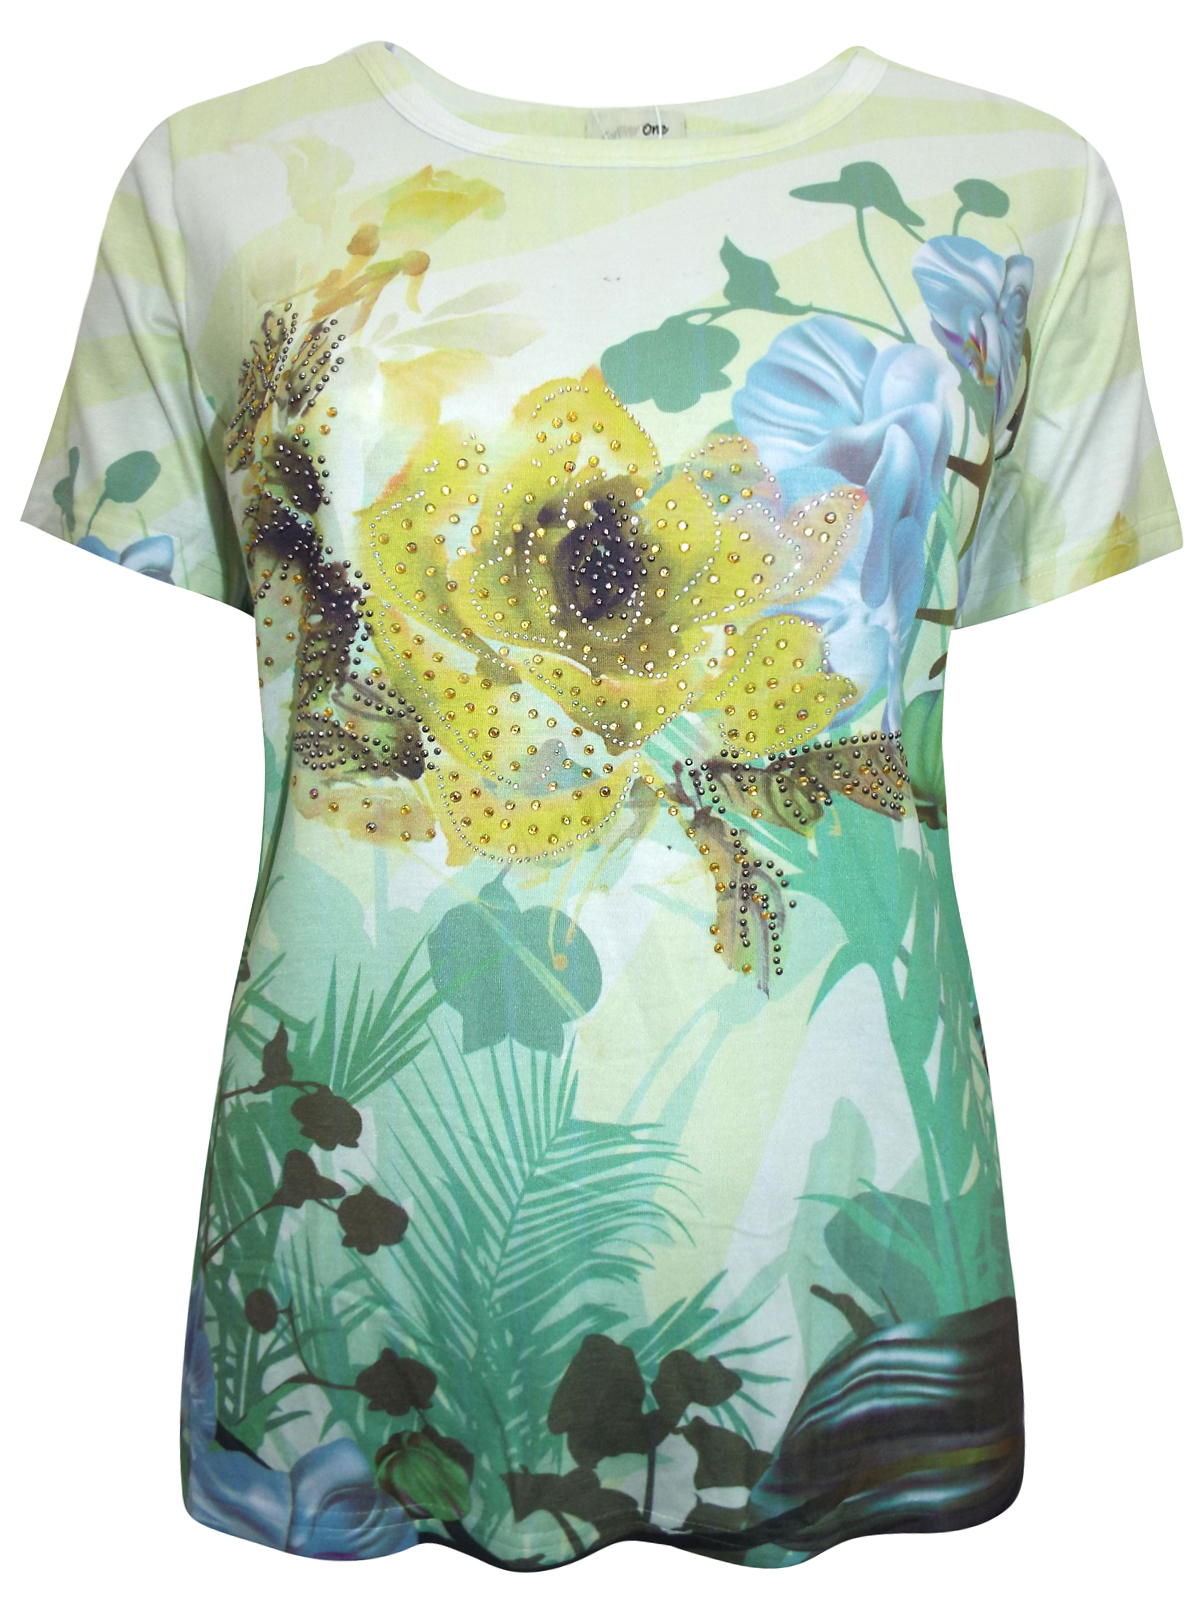 Forever One - - ForeverOne YELLOW Short Sleeve Floral Print Embellished ...